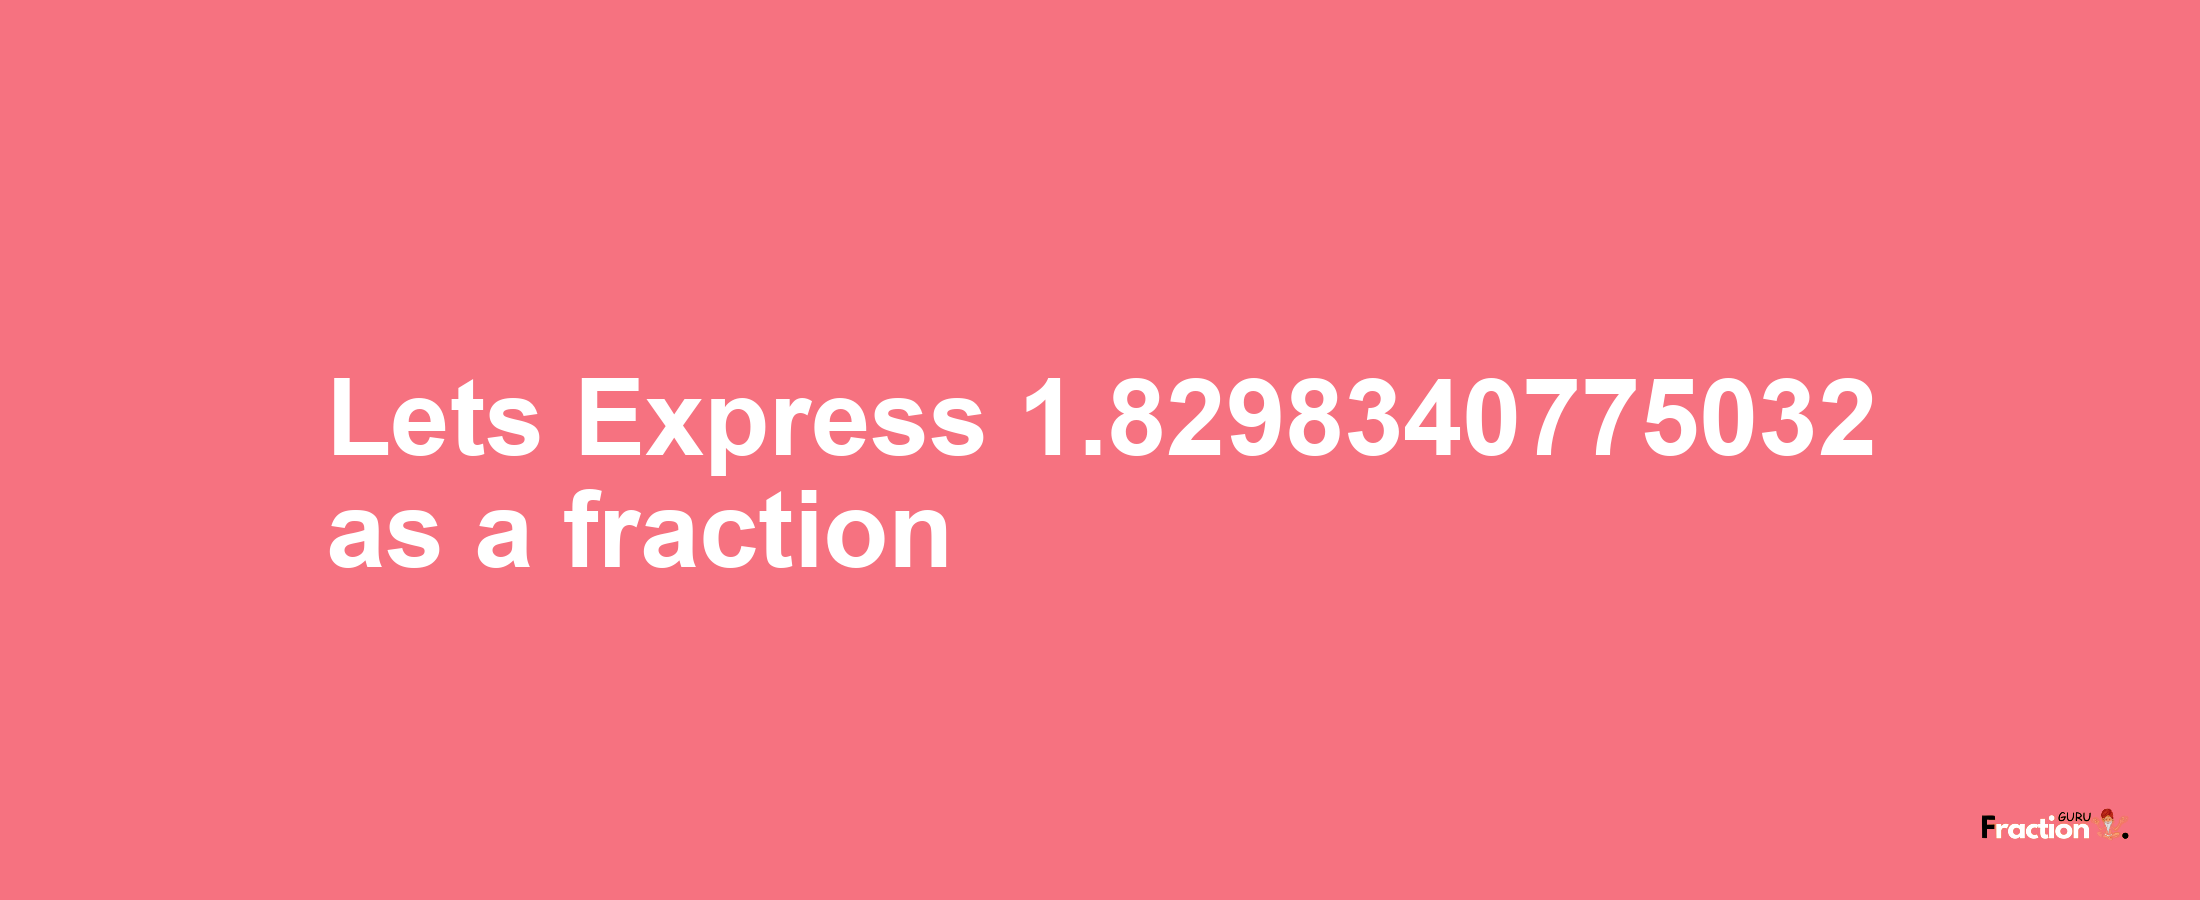 Lets Express 1.8298340775032 as afraction